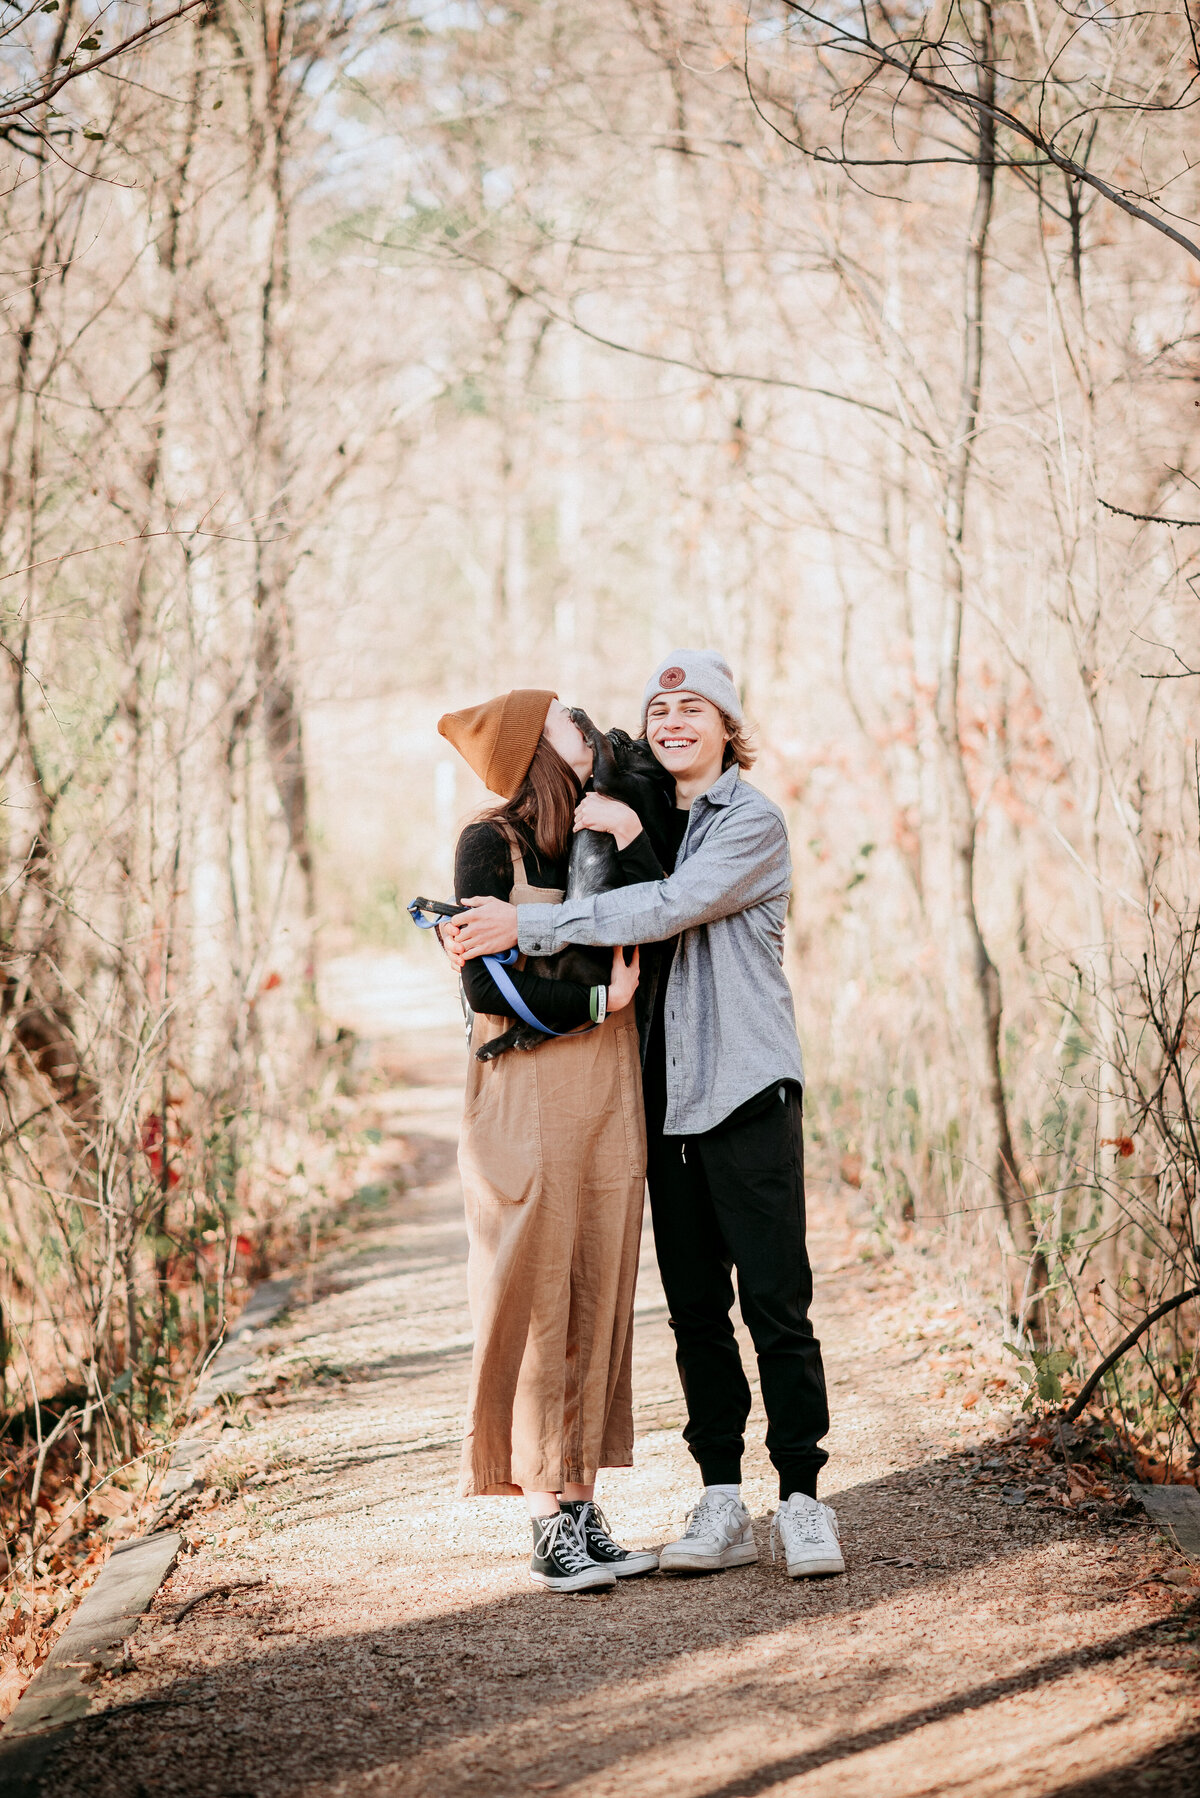 Cherish rustic reverie in your family photos in St. Paul and Minneapolis. Shannon Kathleen Photography captures your joy amidst the rustic beauty of natural settings. Book now for rustic memories